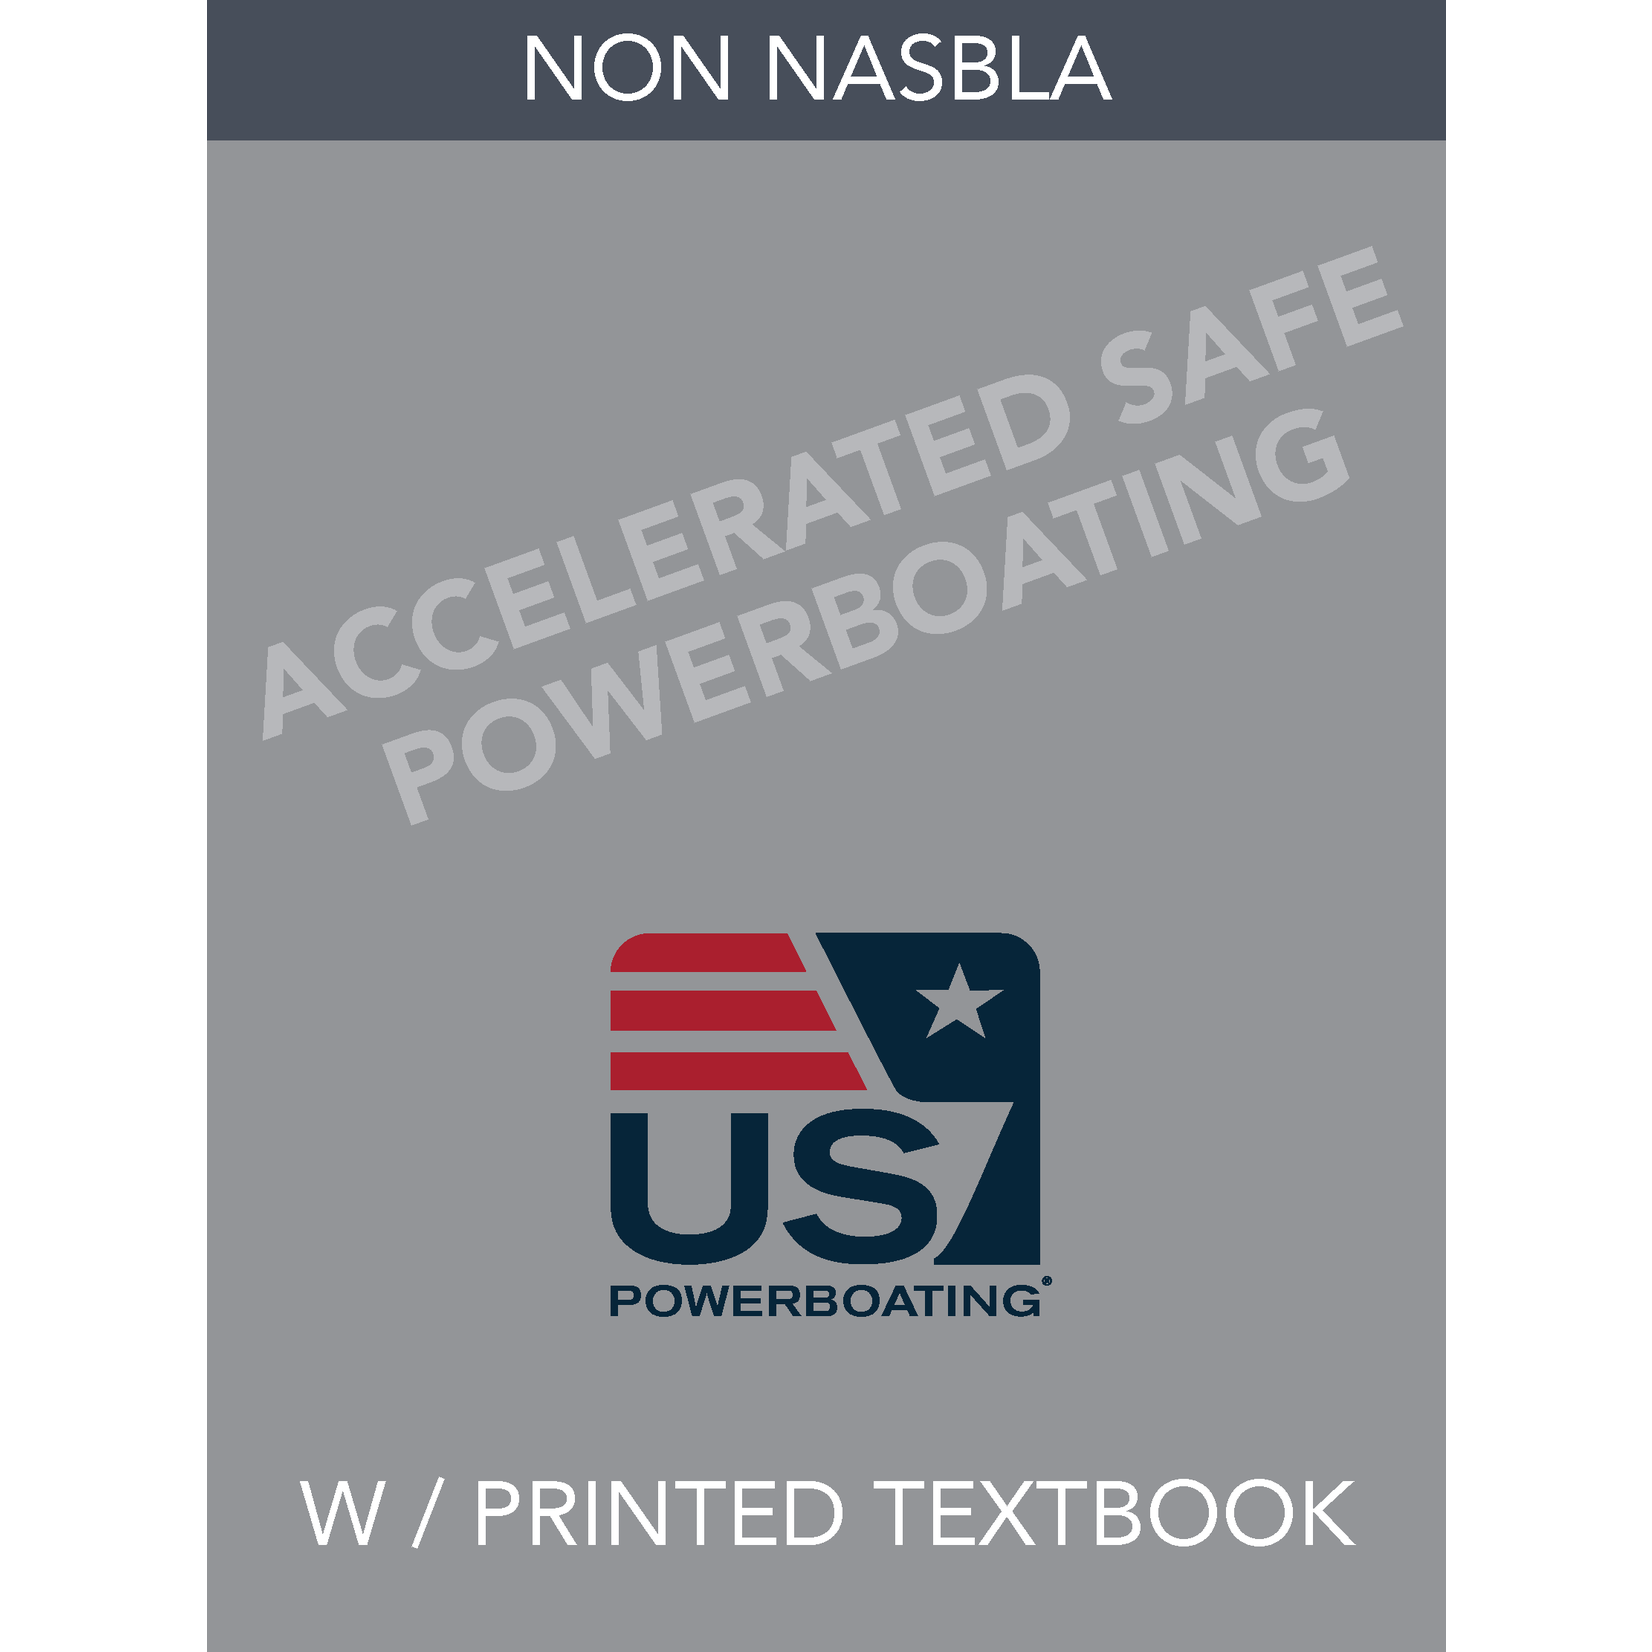 PACKAGE Accelerated (Non-NASBLA) Safe Powerboat Handling